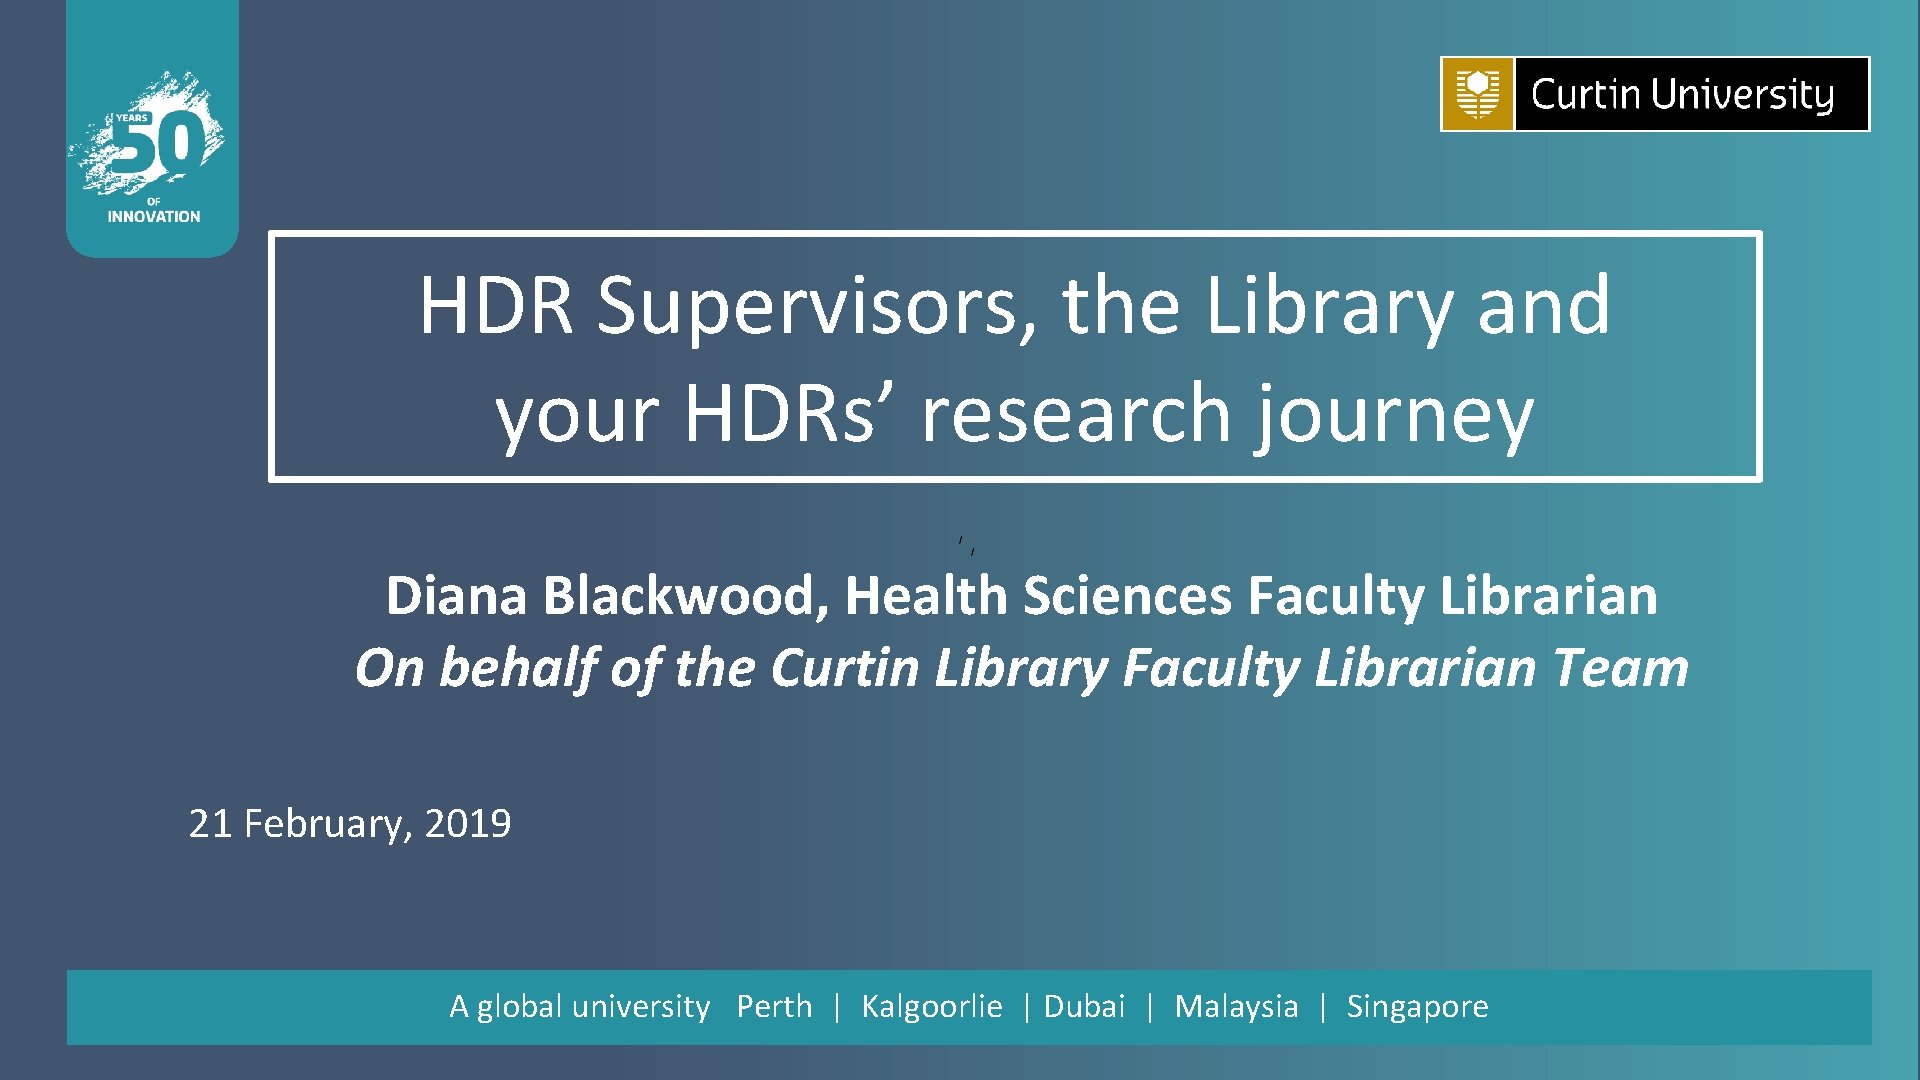 HDR Supervisors, the Library and your HDRs’ research journey Diana Blackwood, Health Sciences Faculty